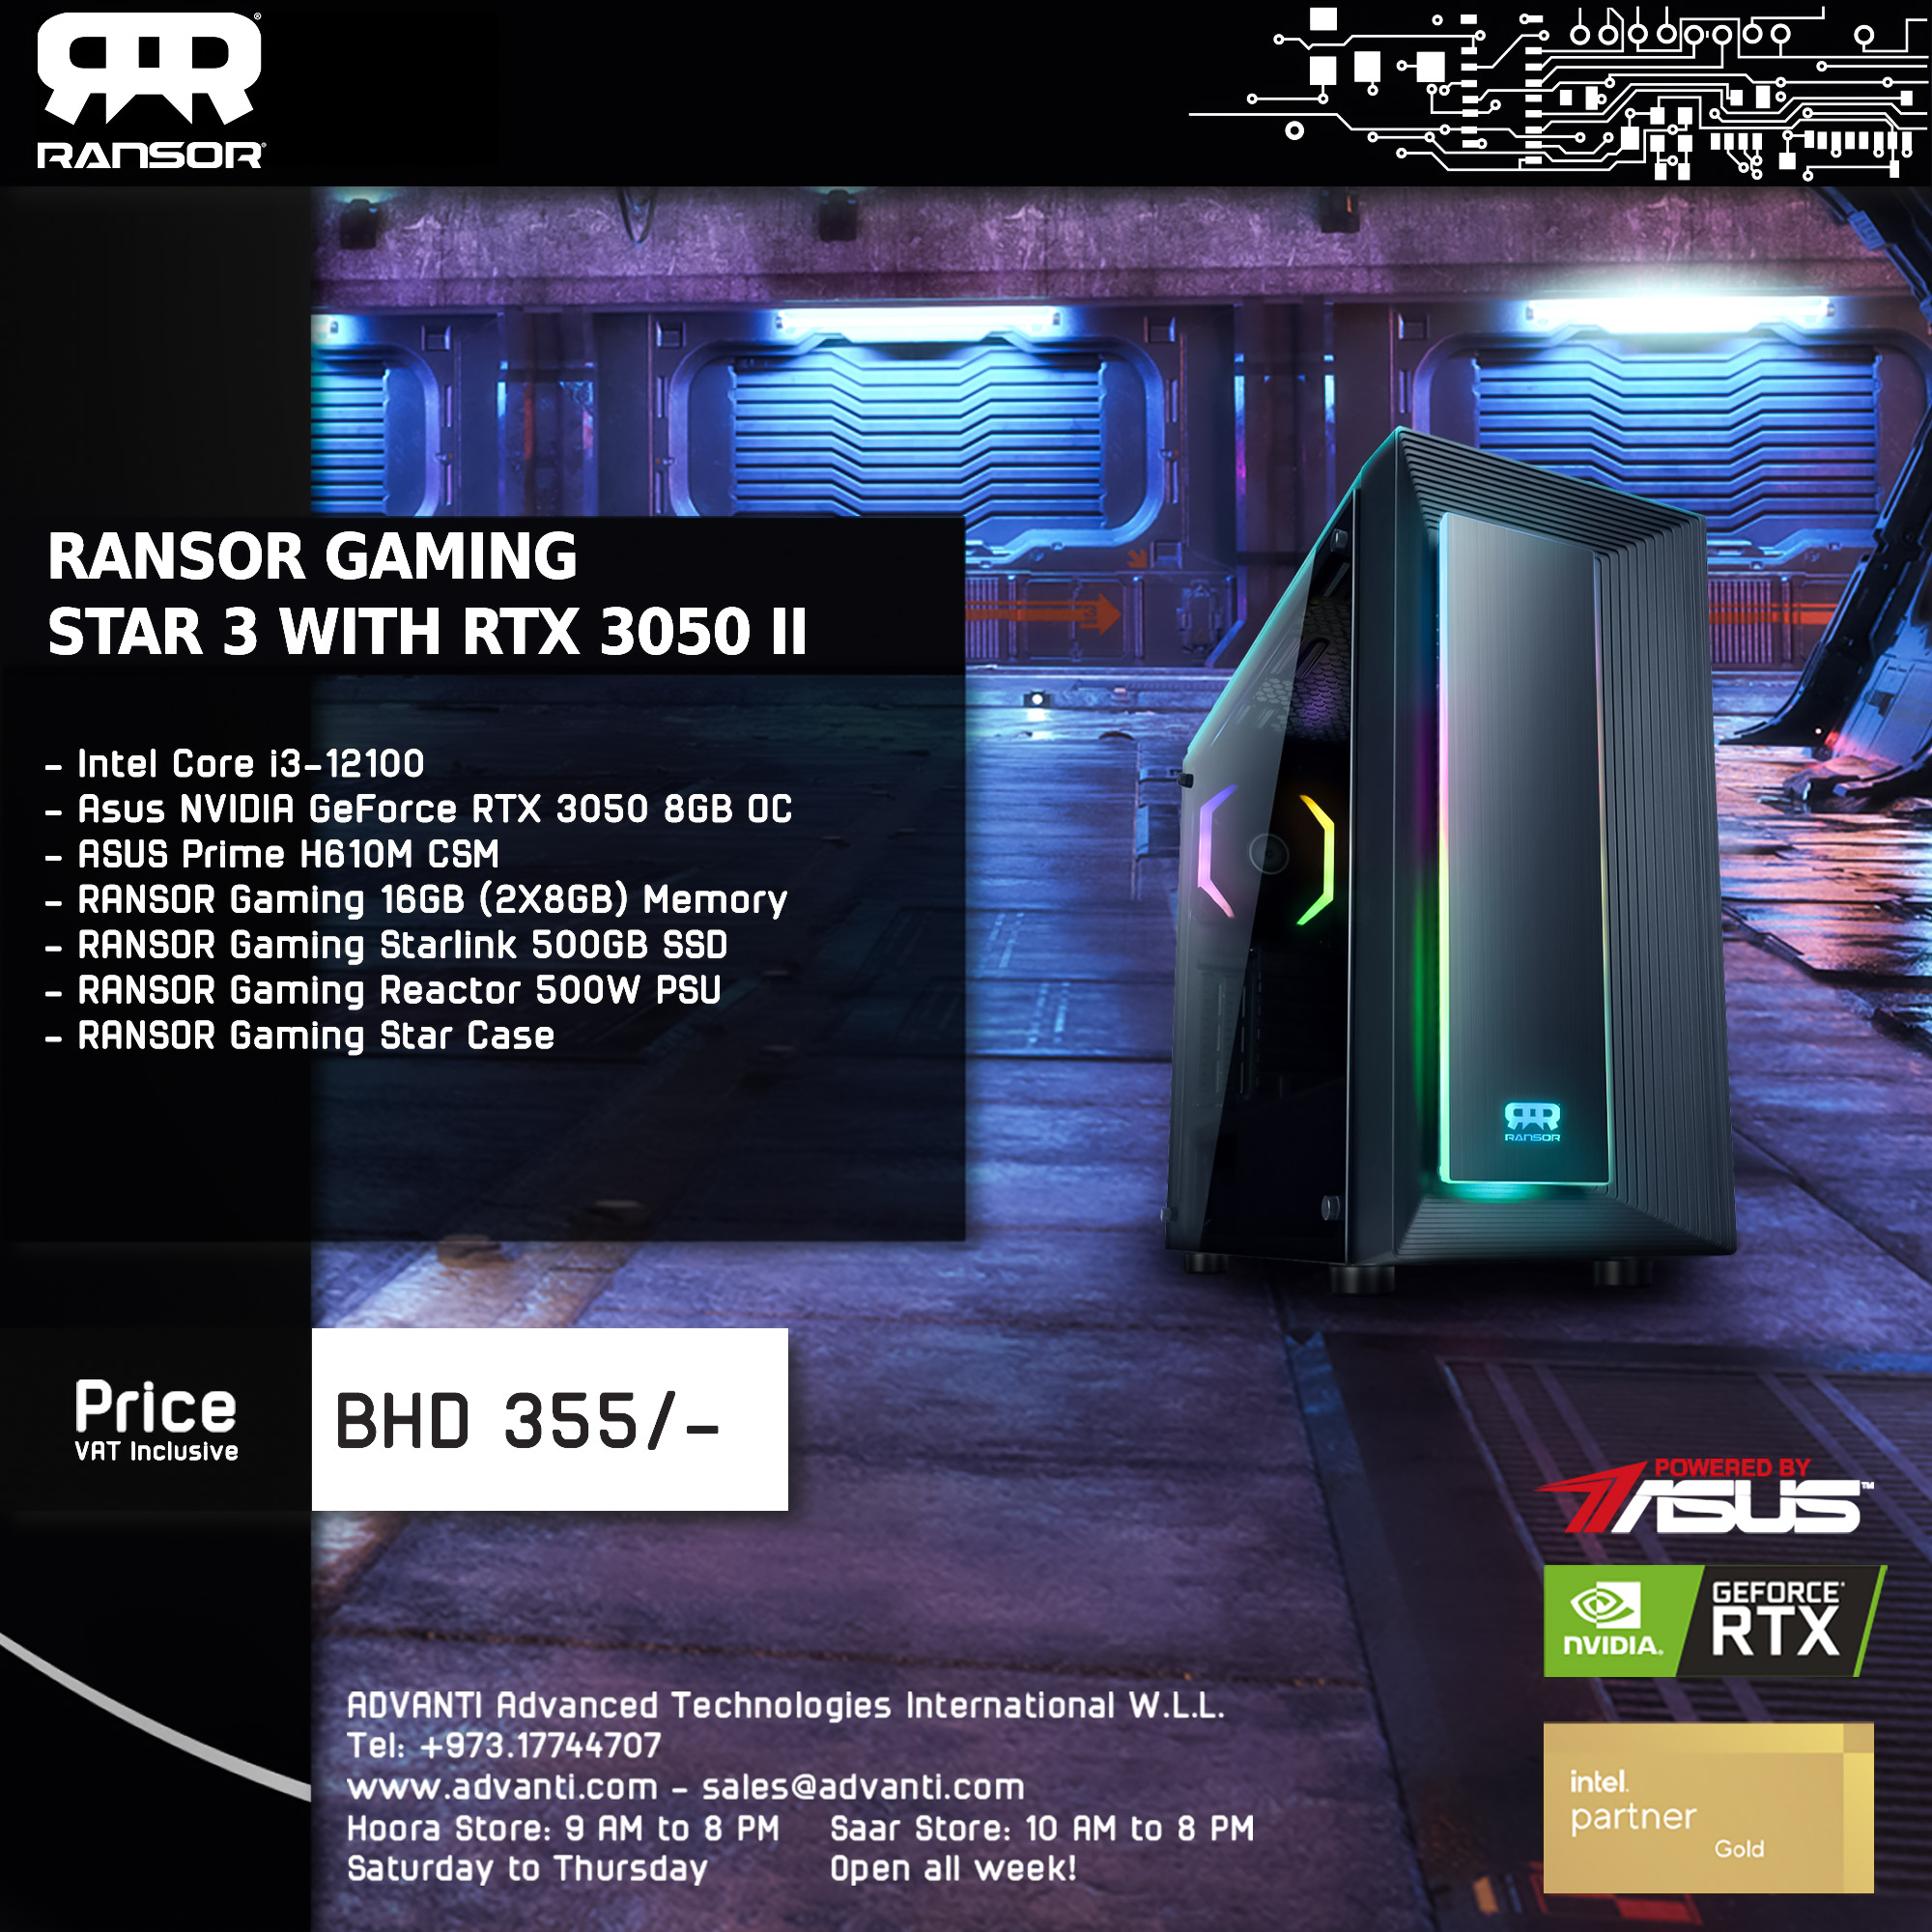 ransor-gaming-star-3-with-rtx-3050-ii-%2